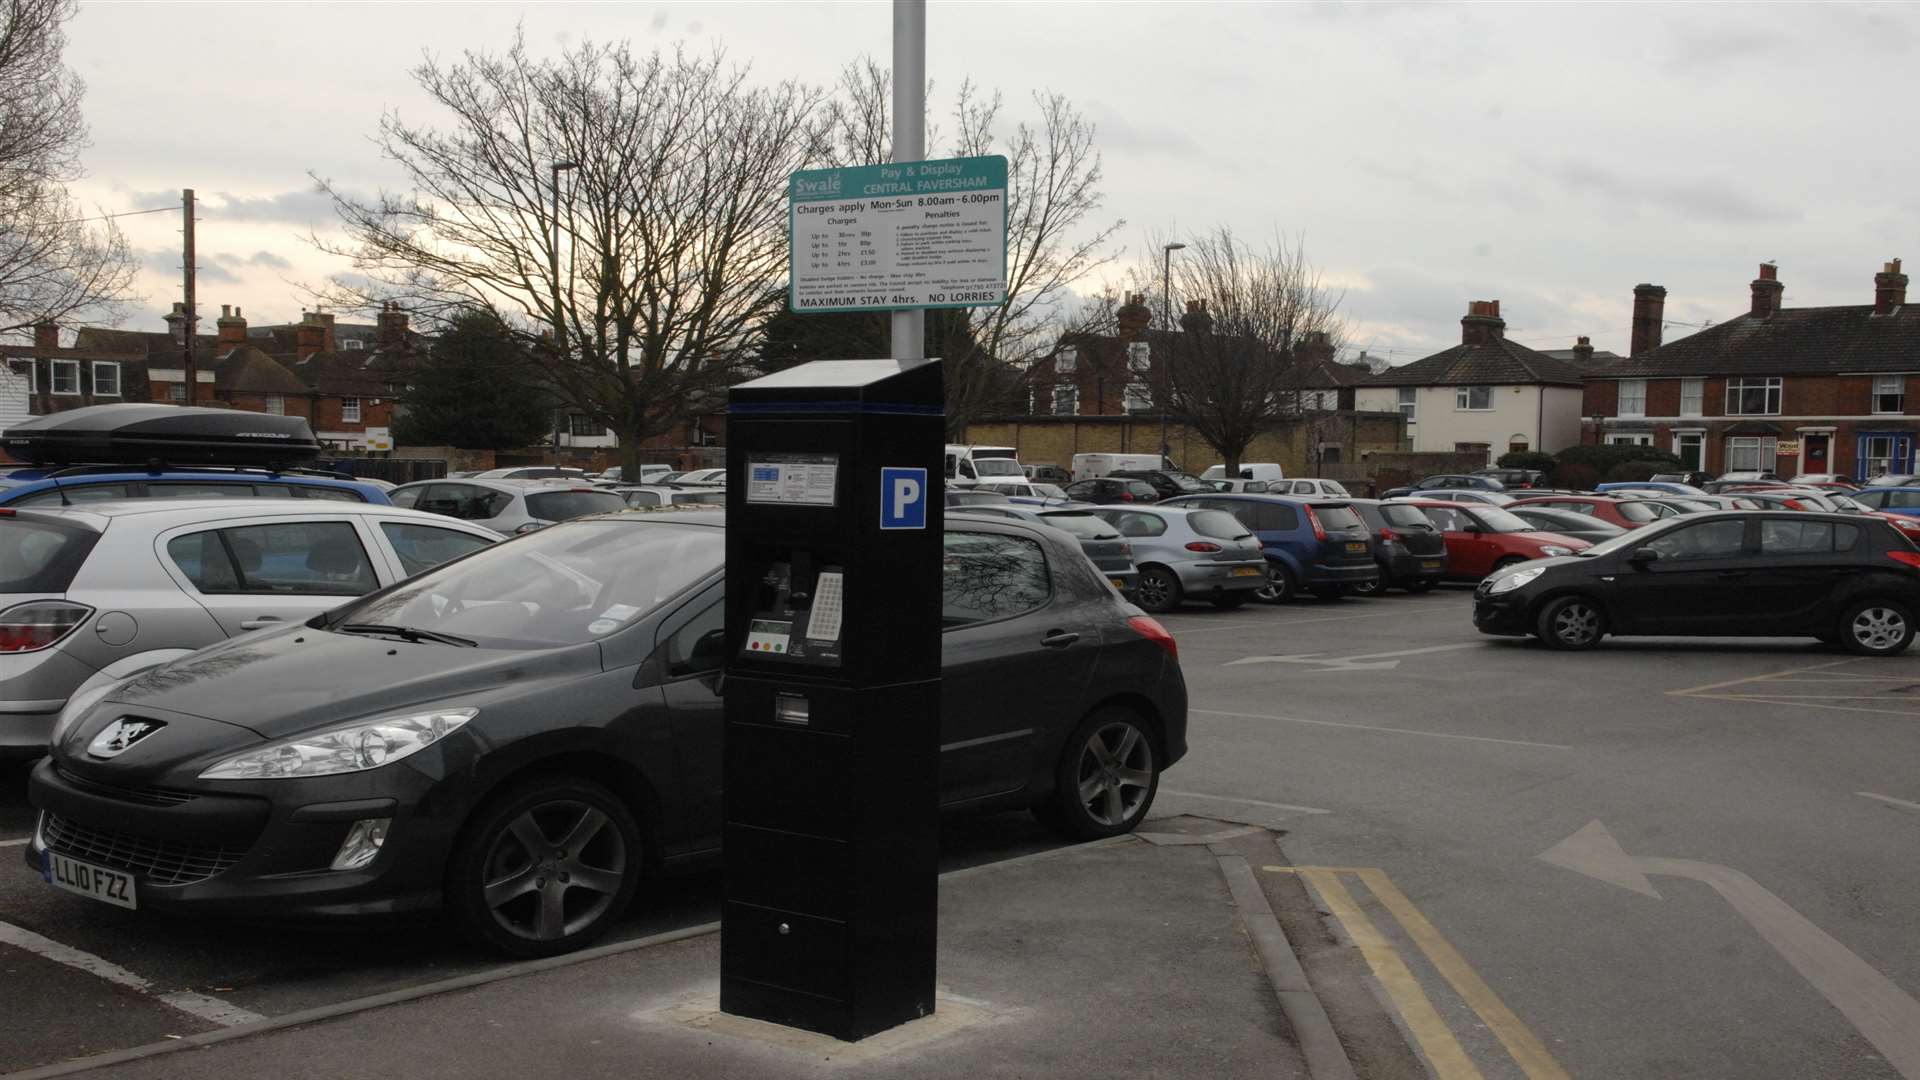 Drivers in Swale will be allowed to park for free to encourage shopping locally